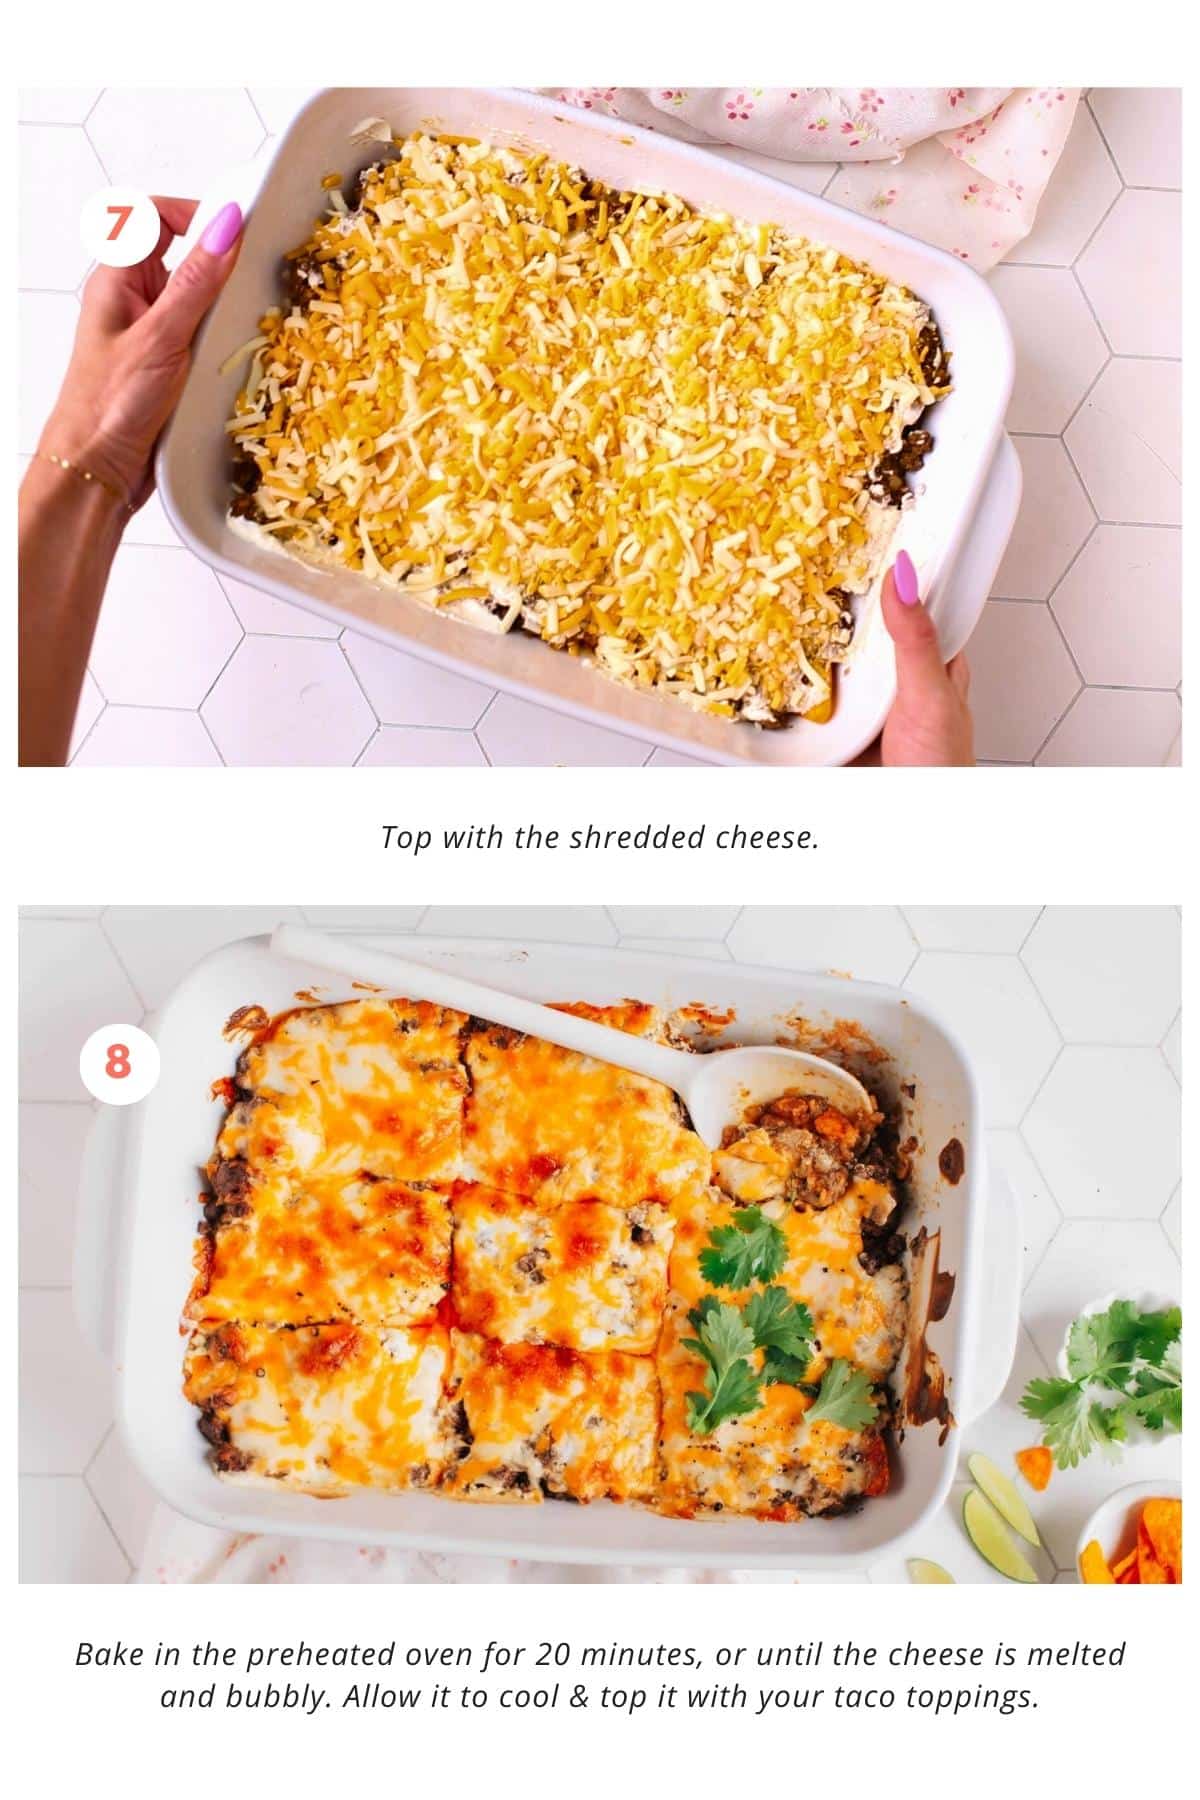 The dish is topped with shredded cheese. Finally, the casserole is baked in the preheated oven for 20 minutes, or until the cheese is melted and becomes bubbly.